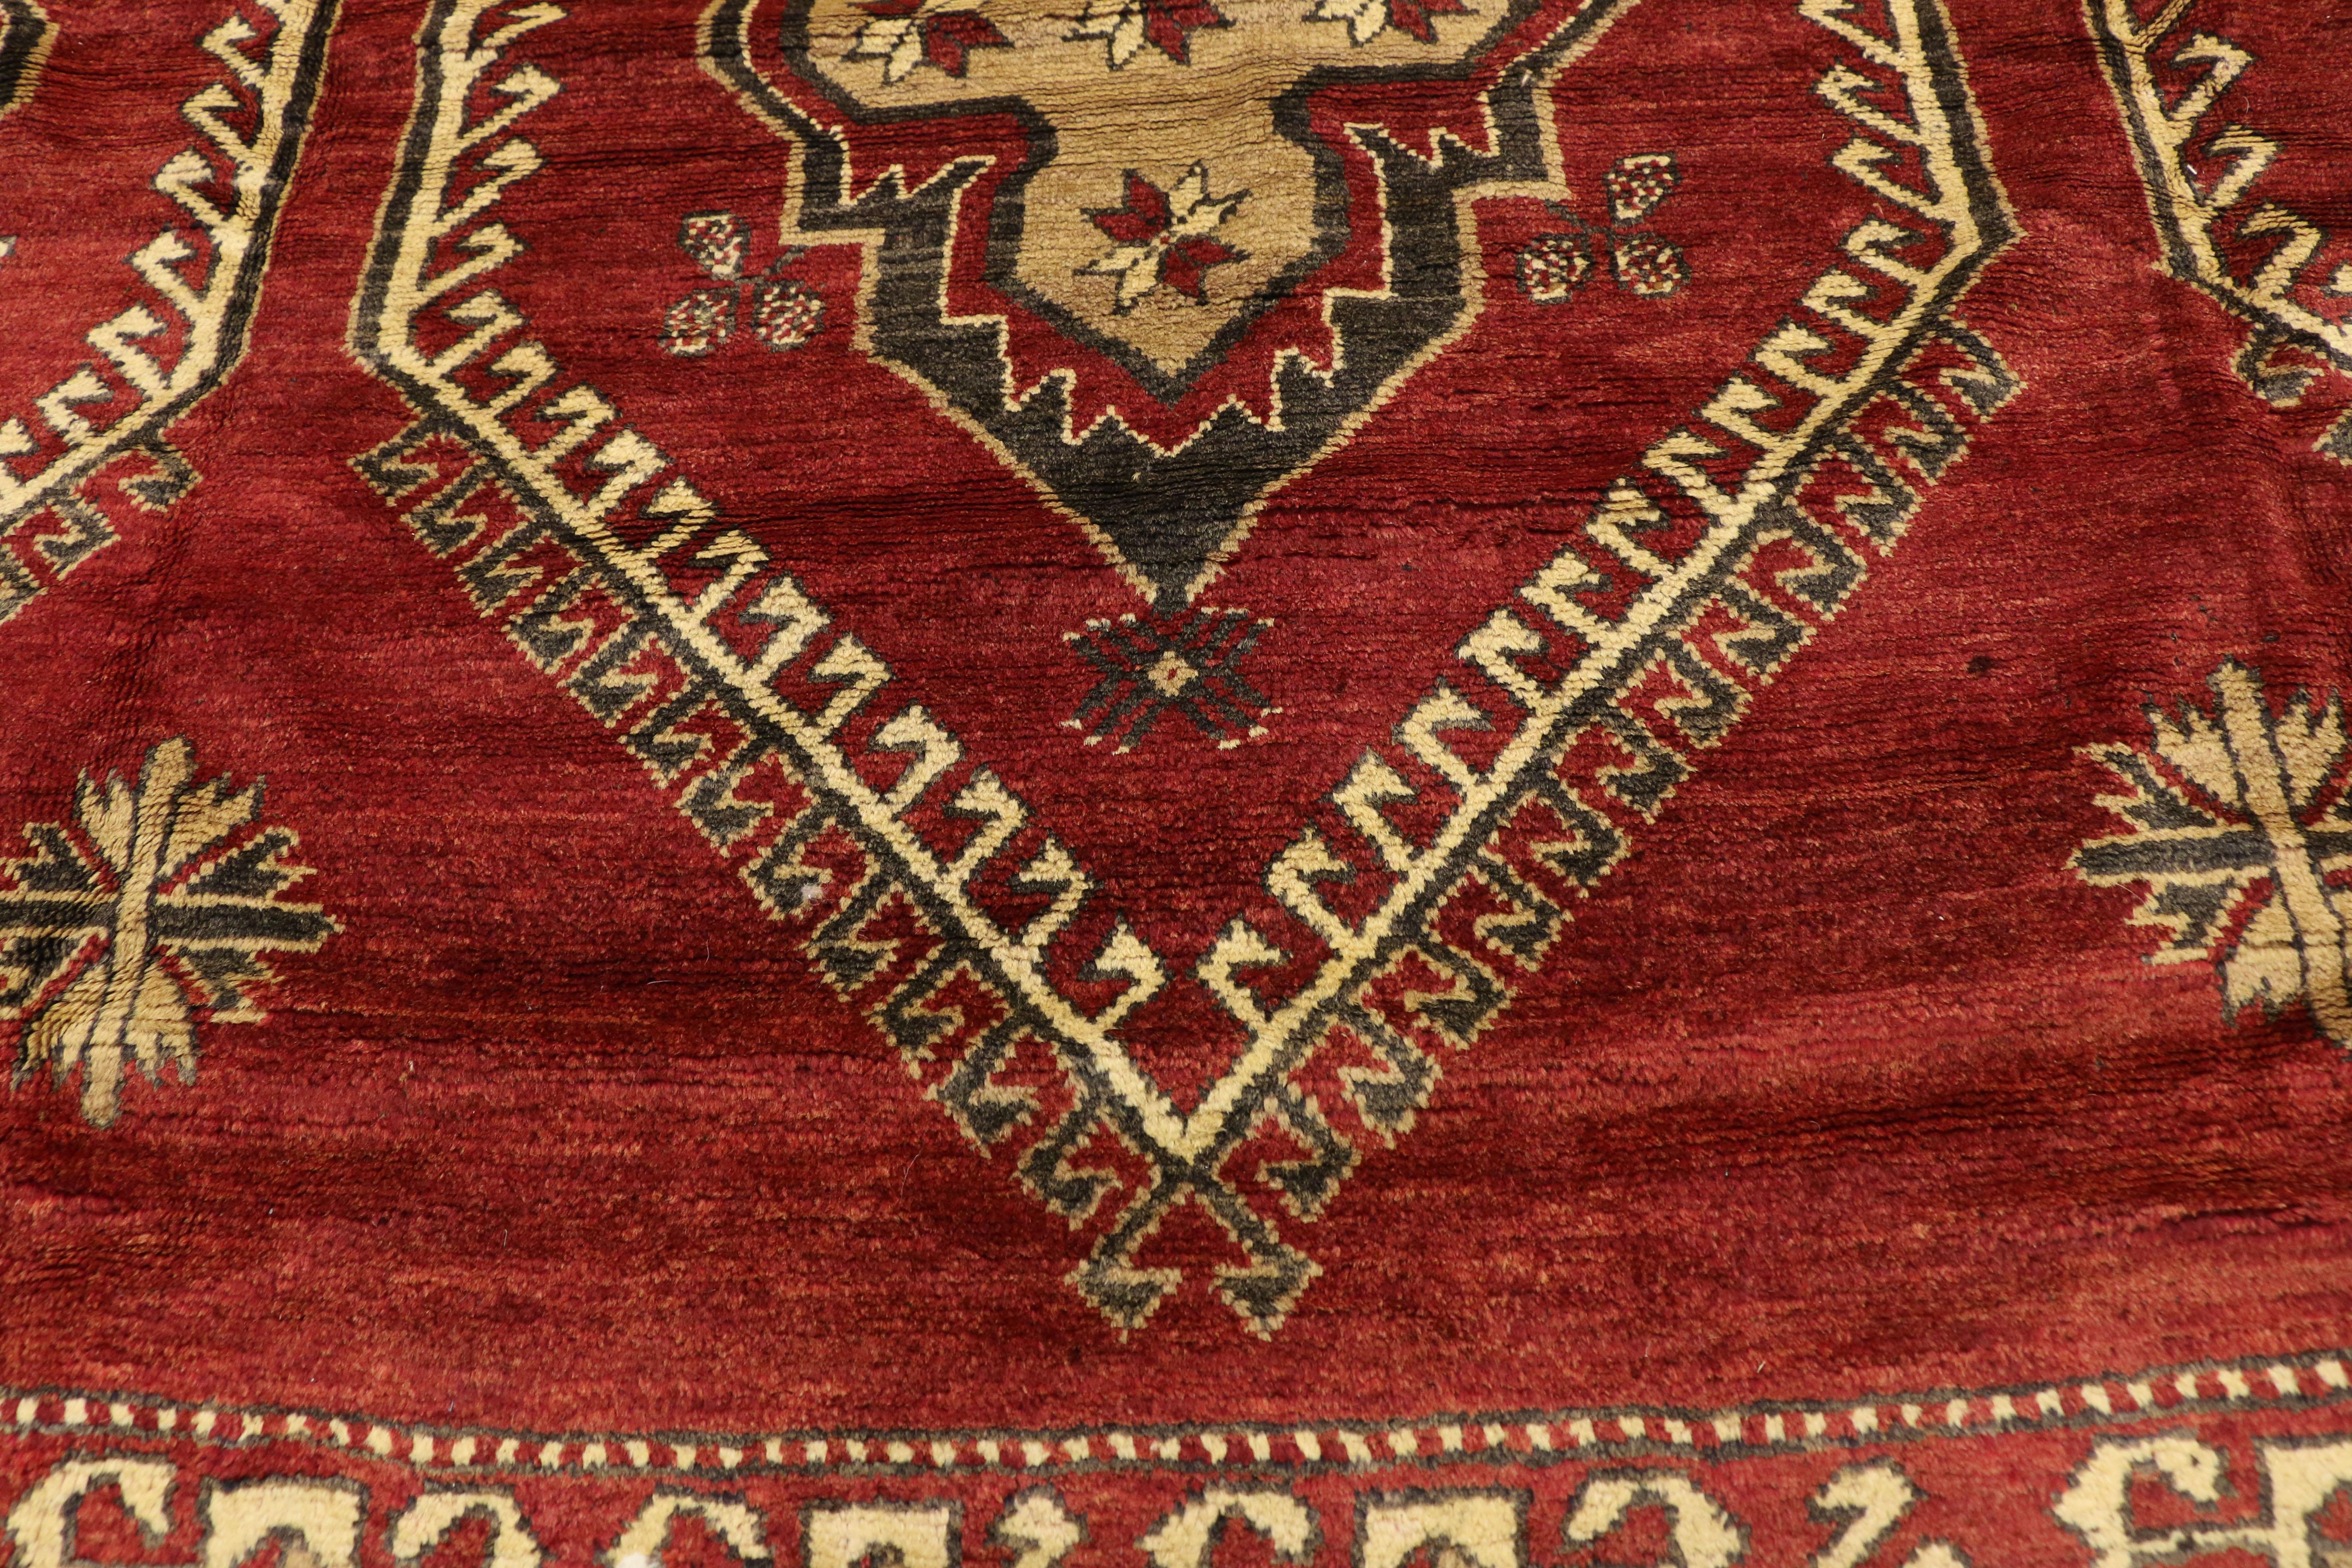 Vintage Turkish Oushak Rug with Modern Medieval Elizabethan Style In Good Condition For Sale In Dallas, TX